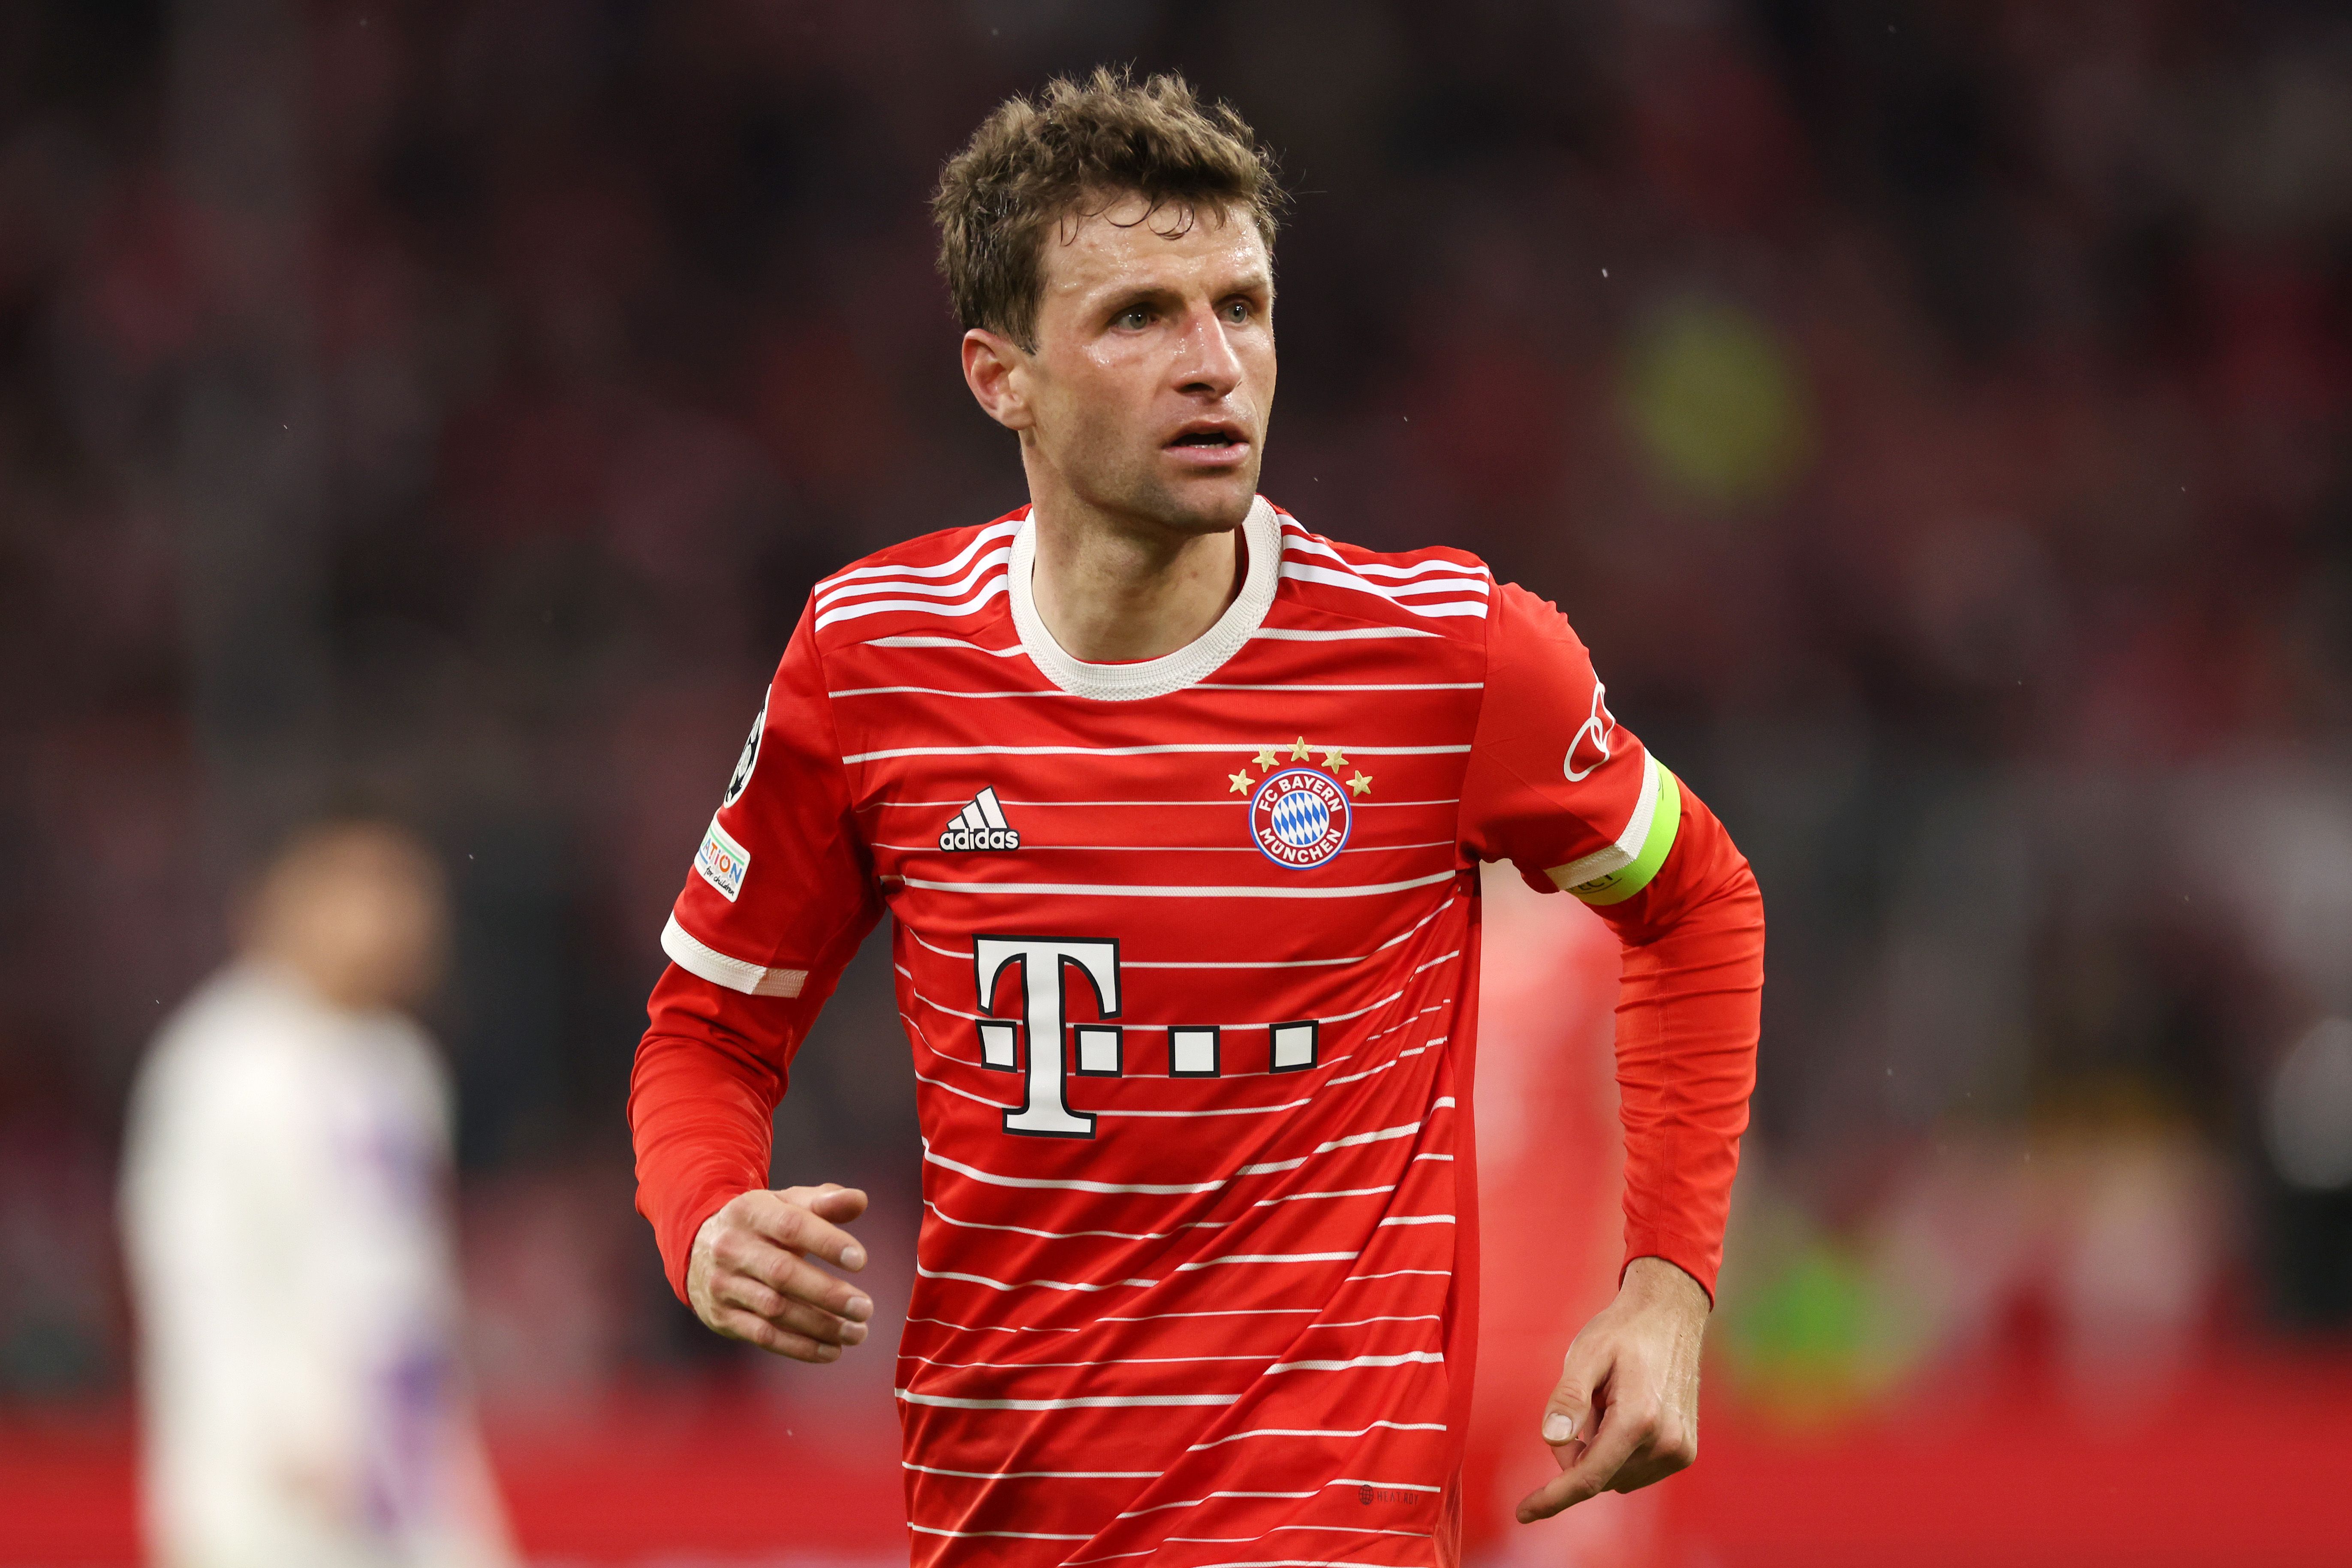 Thomas Muller’s comments about Lionel Messi and Cristiano Ronaldo go viral after Bayern 2-0 PSG